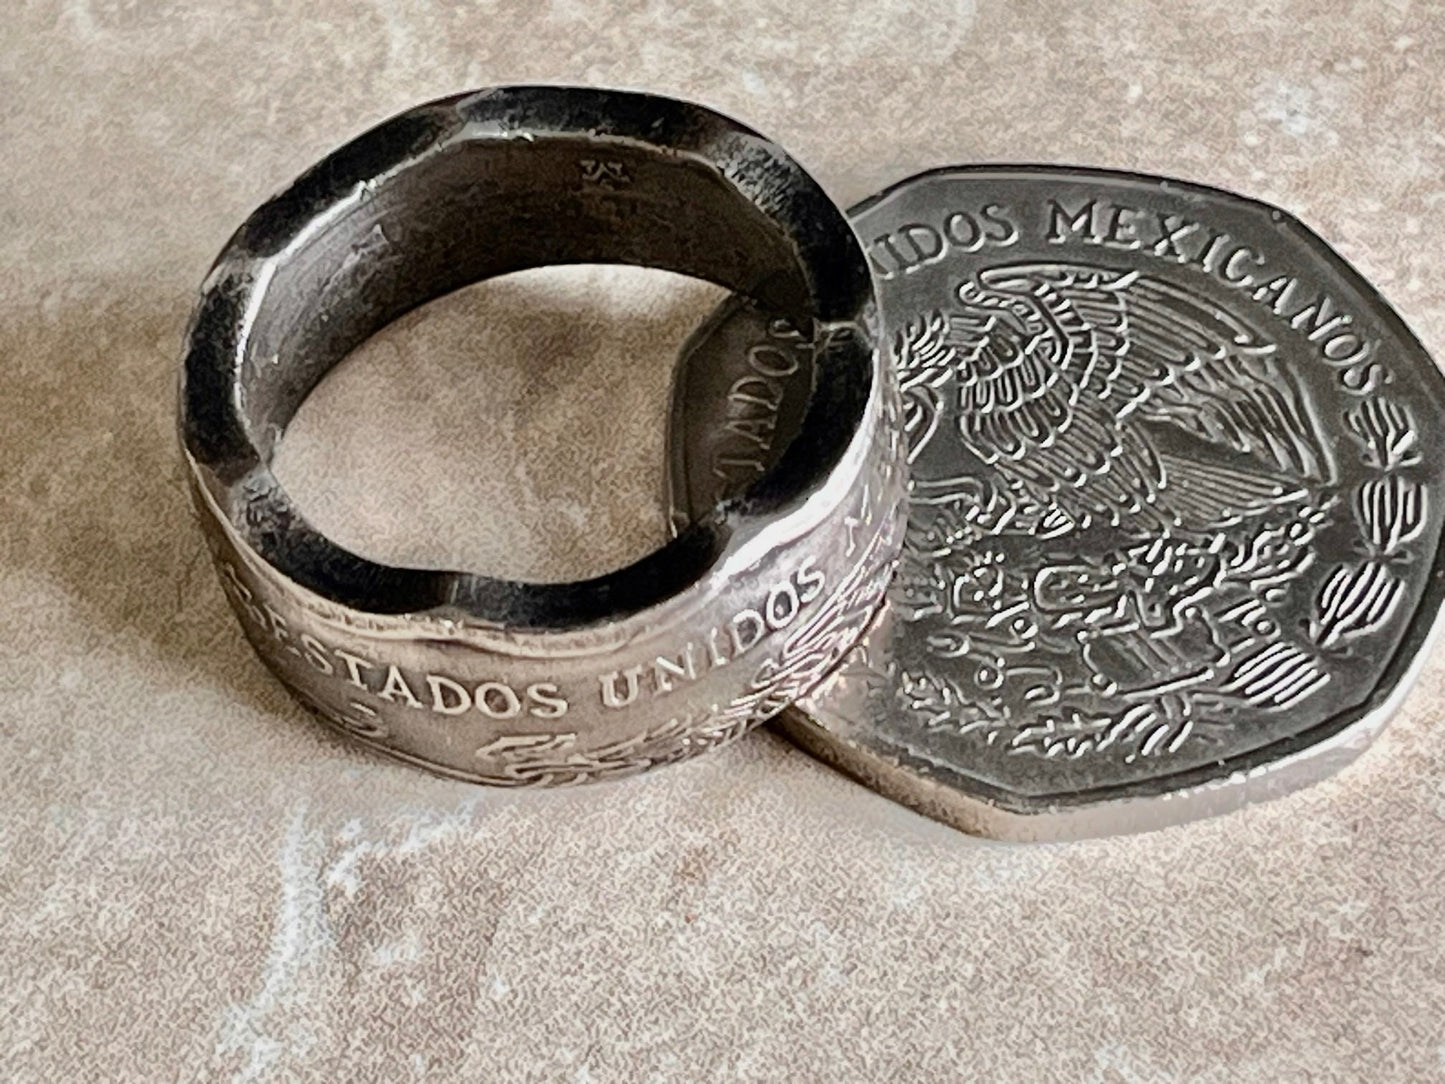 Mexico Ring 10 Peso Mexican Coin Ring Handmade Personal Jewelry Ring Gift For Friend Coin Ring Gift For Him Her World Coin Collector